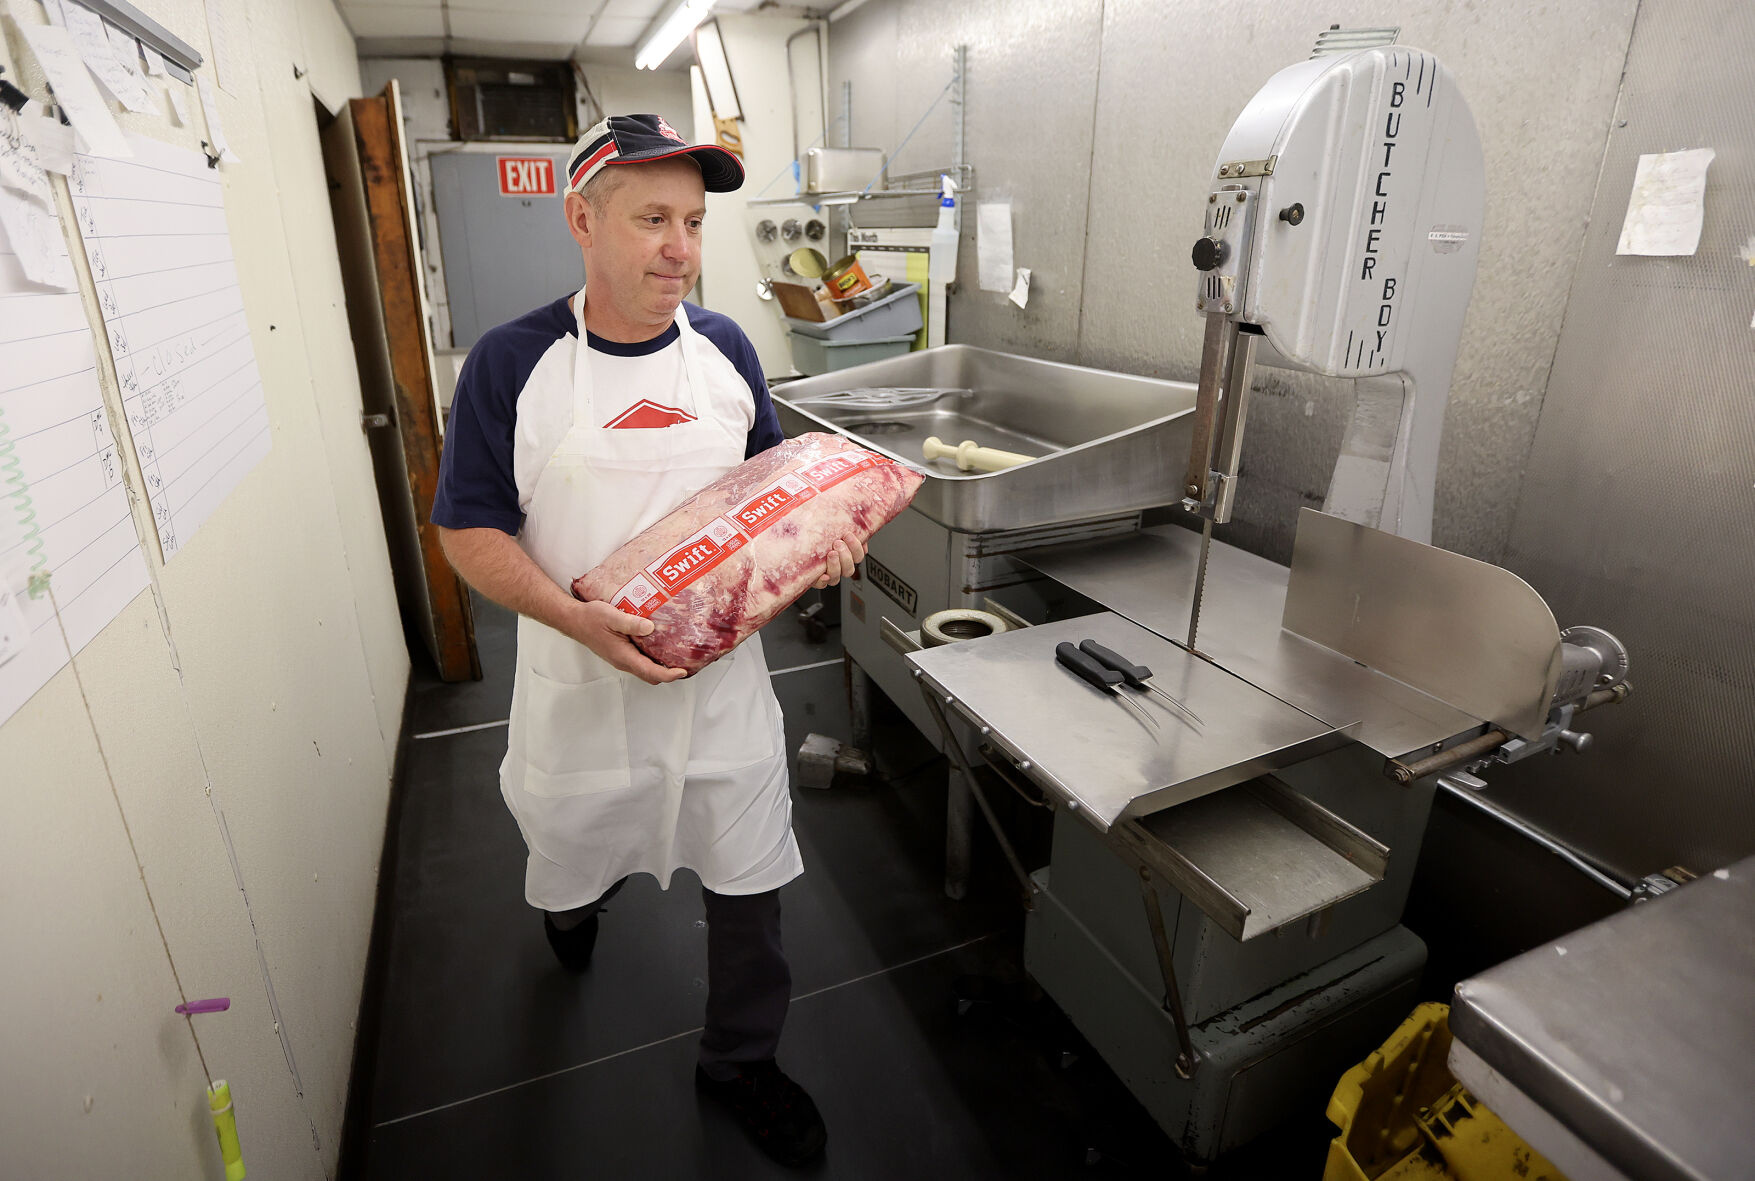 Jeff Cremer carries a slab of prime meat to be cut and offered for sale inside Cremer’s in Dubuque.    PHOTO CREDIT: Dave Kettering/Telegraph Herald